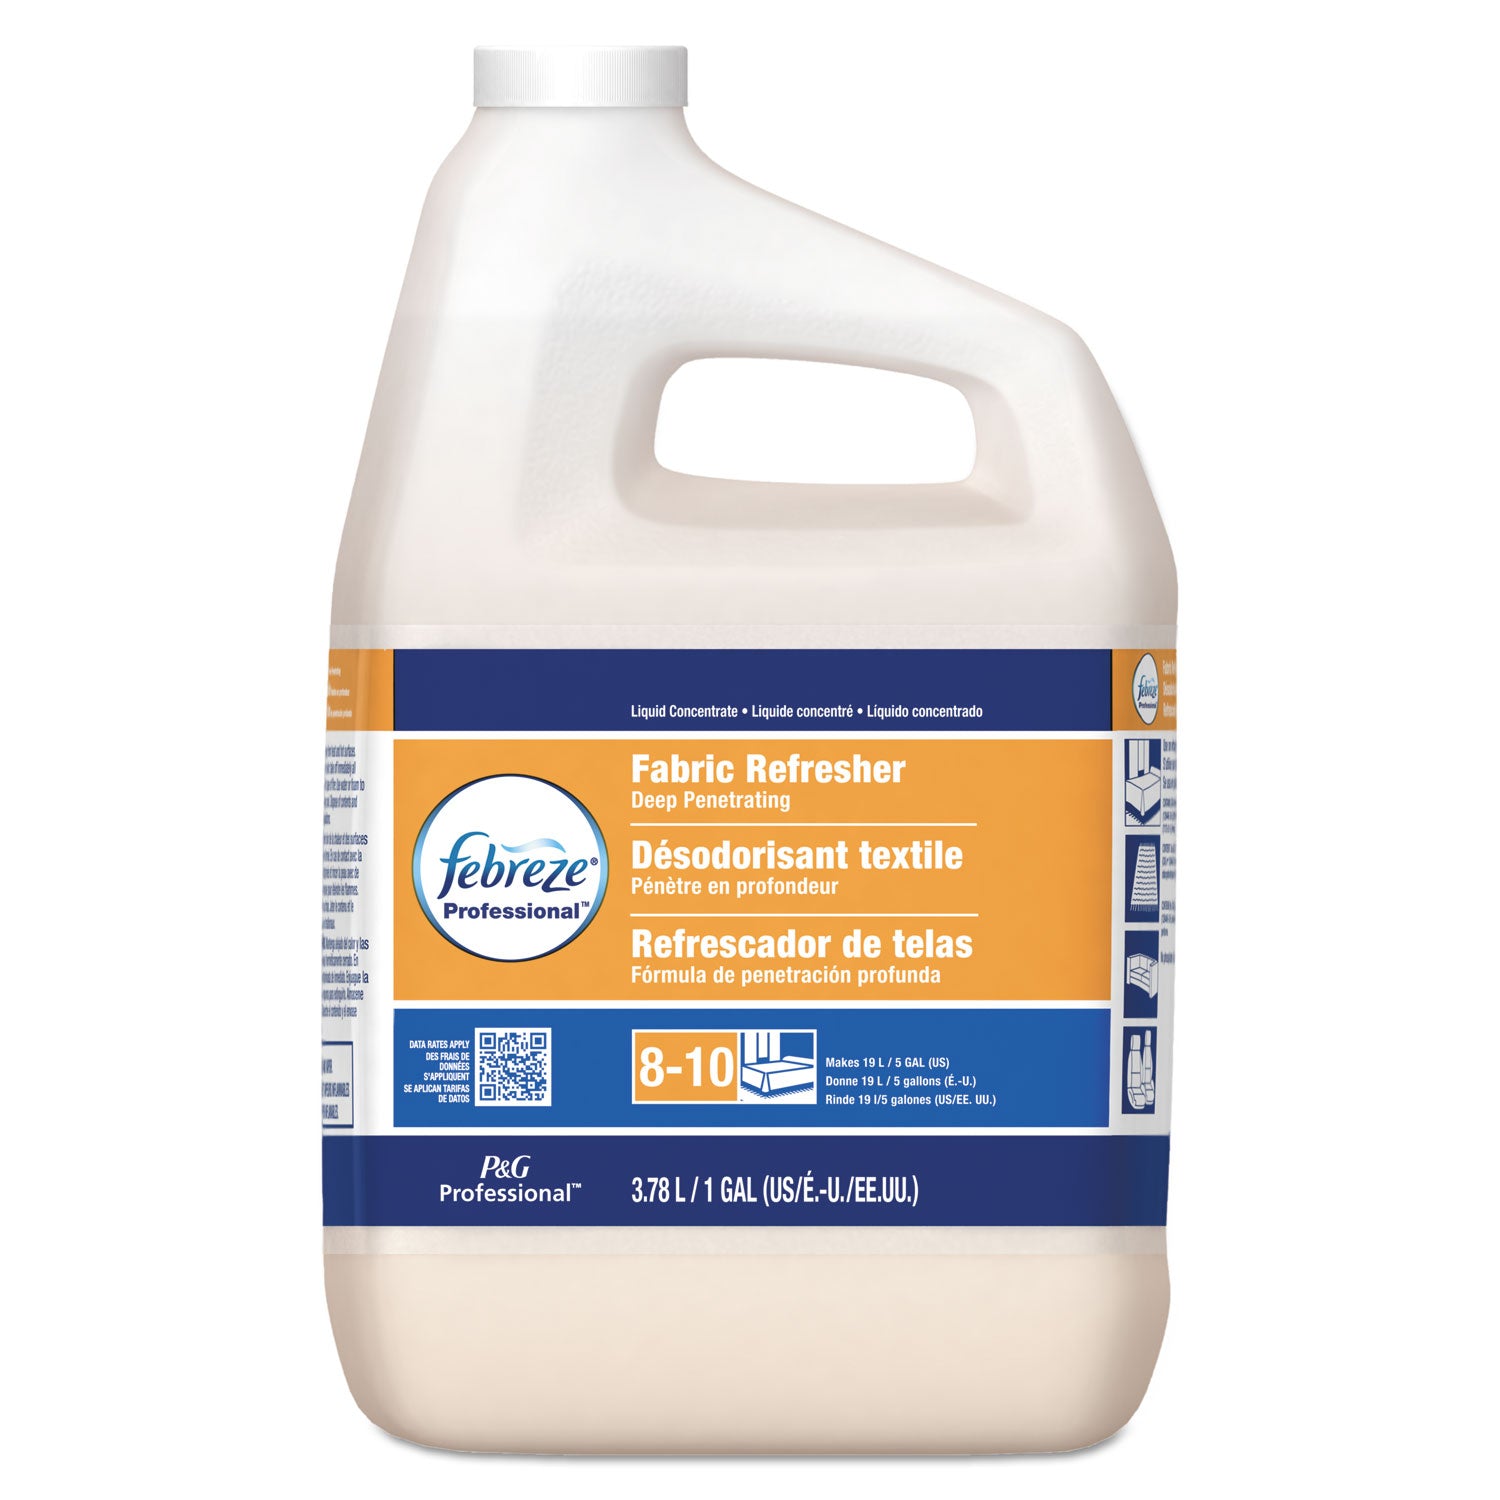 professional-deep-penetrating-fabric-refresher-5x-concentrate-1-gal-bottle-2-carton_pgc36551 - 1